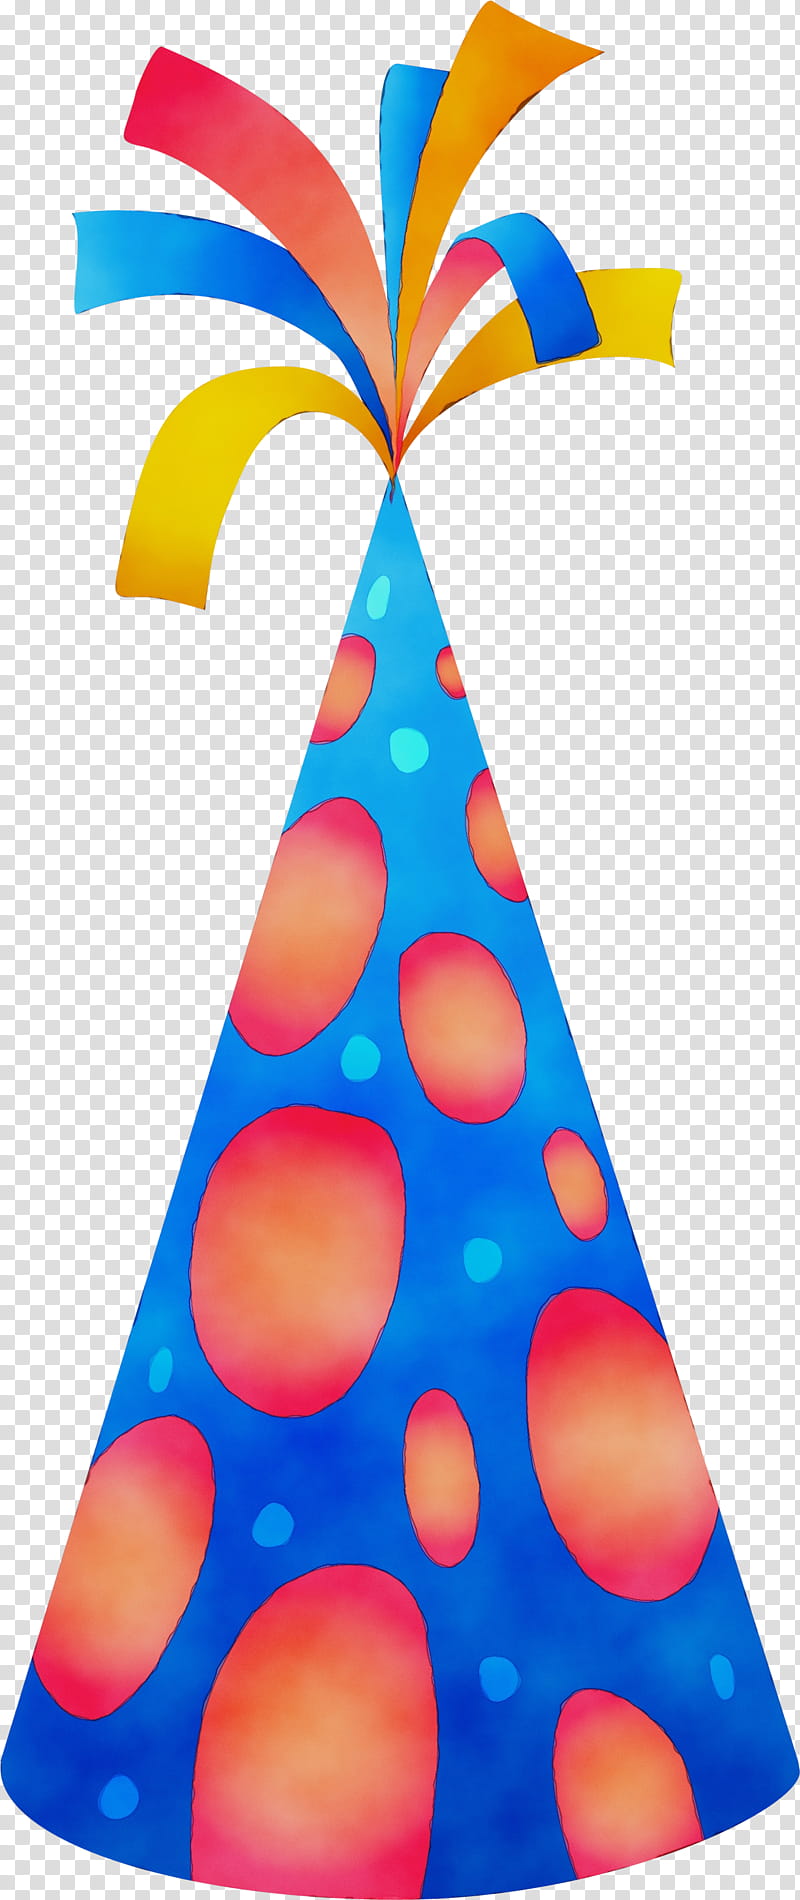 Party hat, Watercolor, Paint, Wet Ink, Orange, Cone, Electric Blue, Polka Dot transparent background PNG clipart